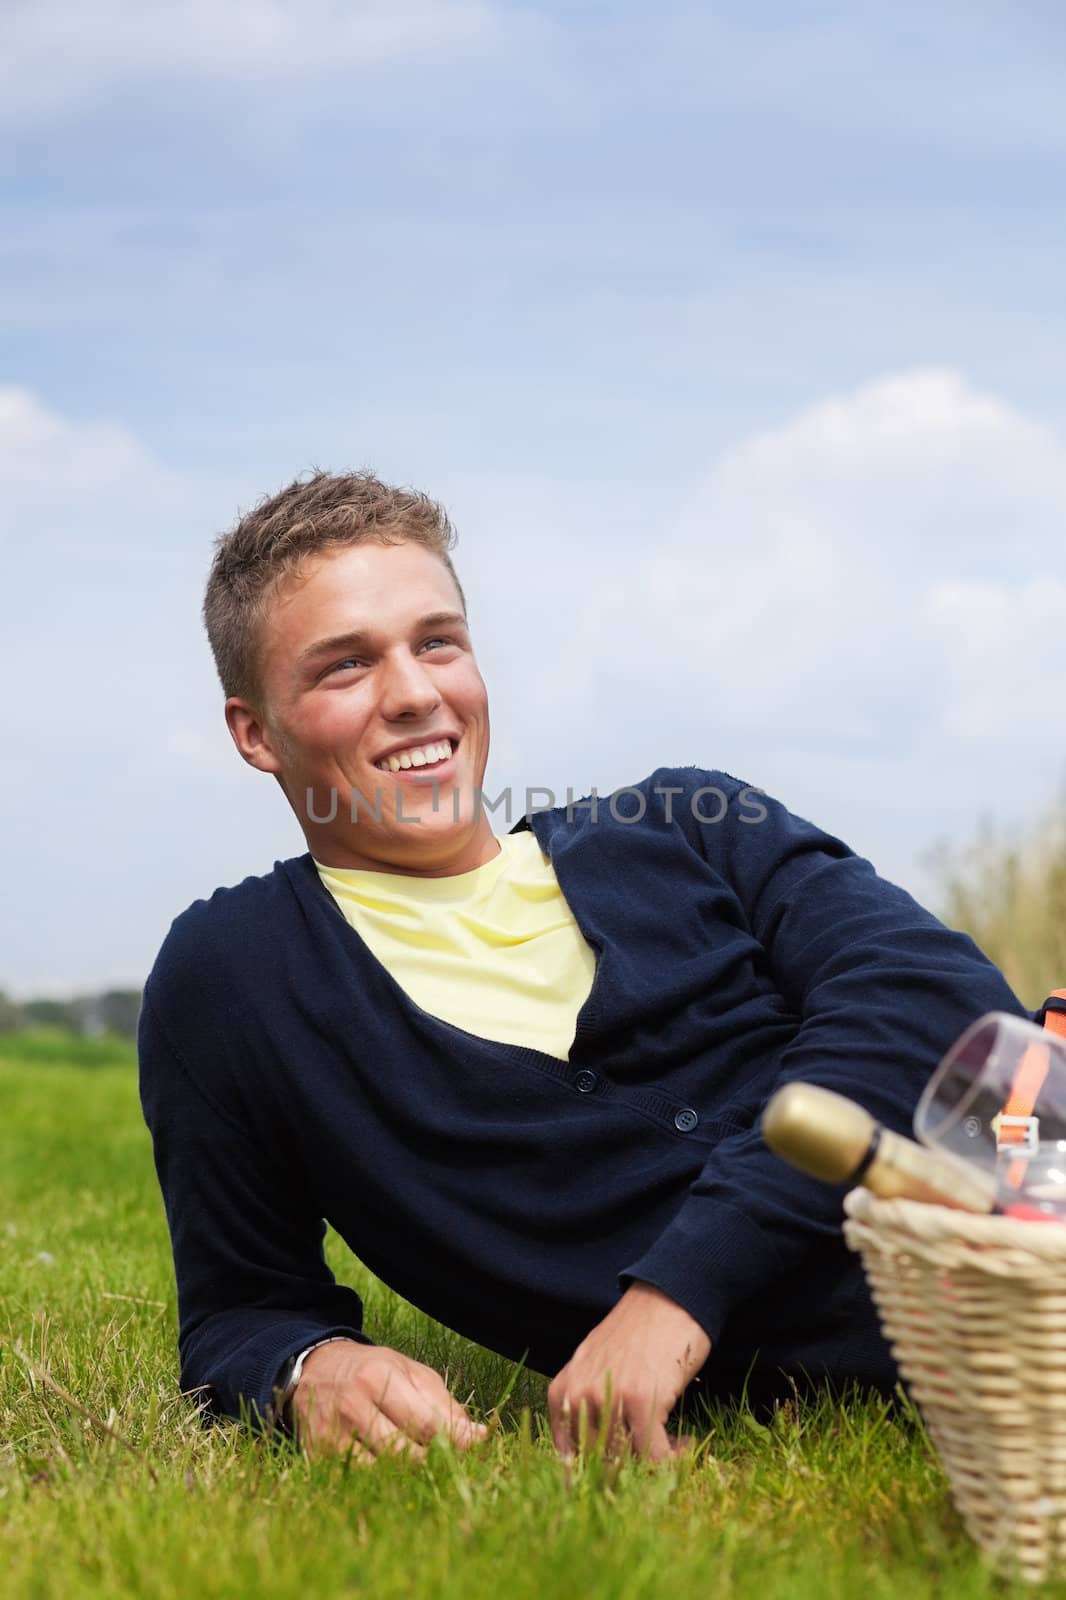 Young smiling man lying on the grass with picnic basket near him